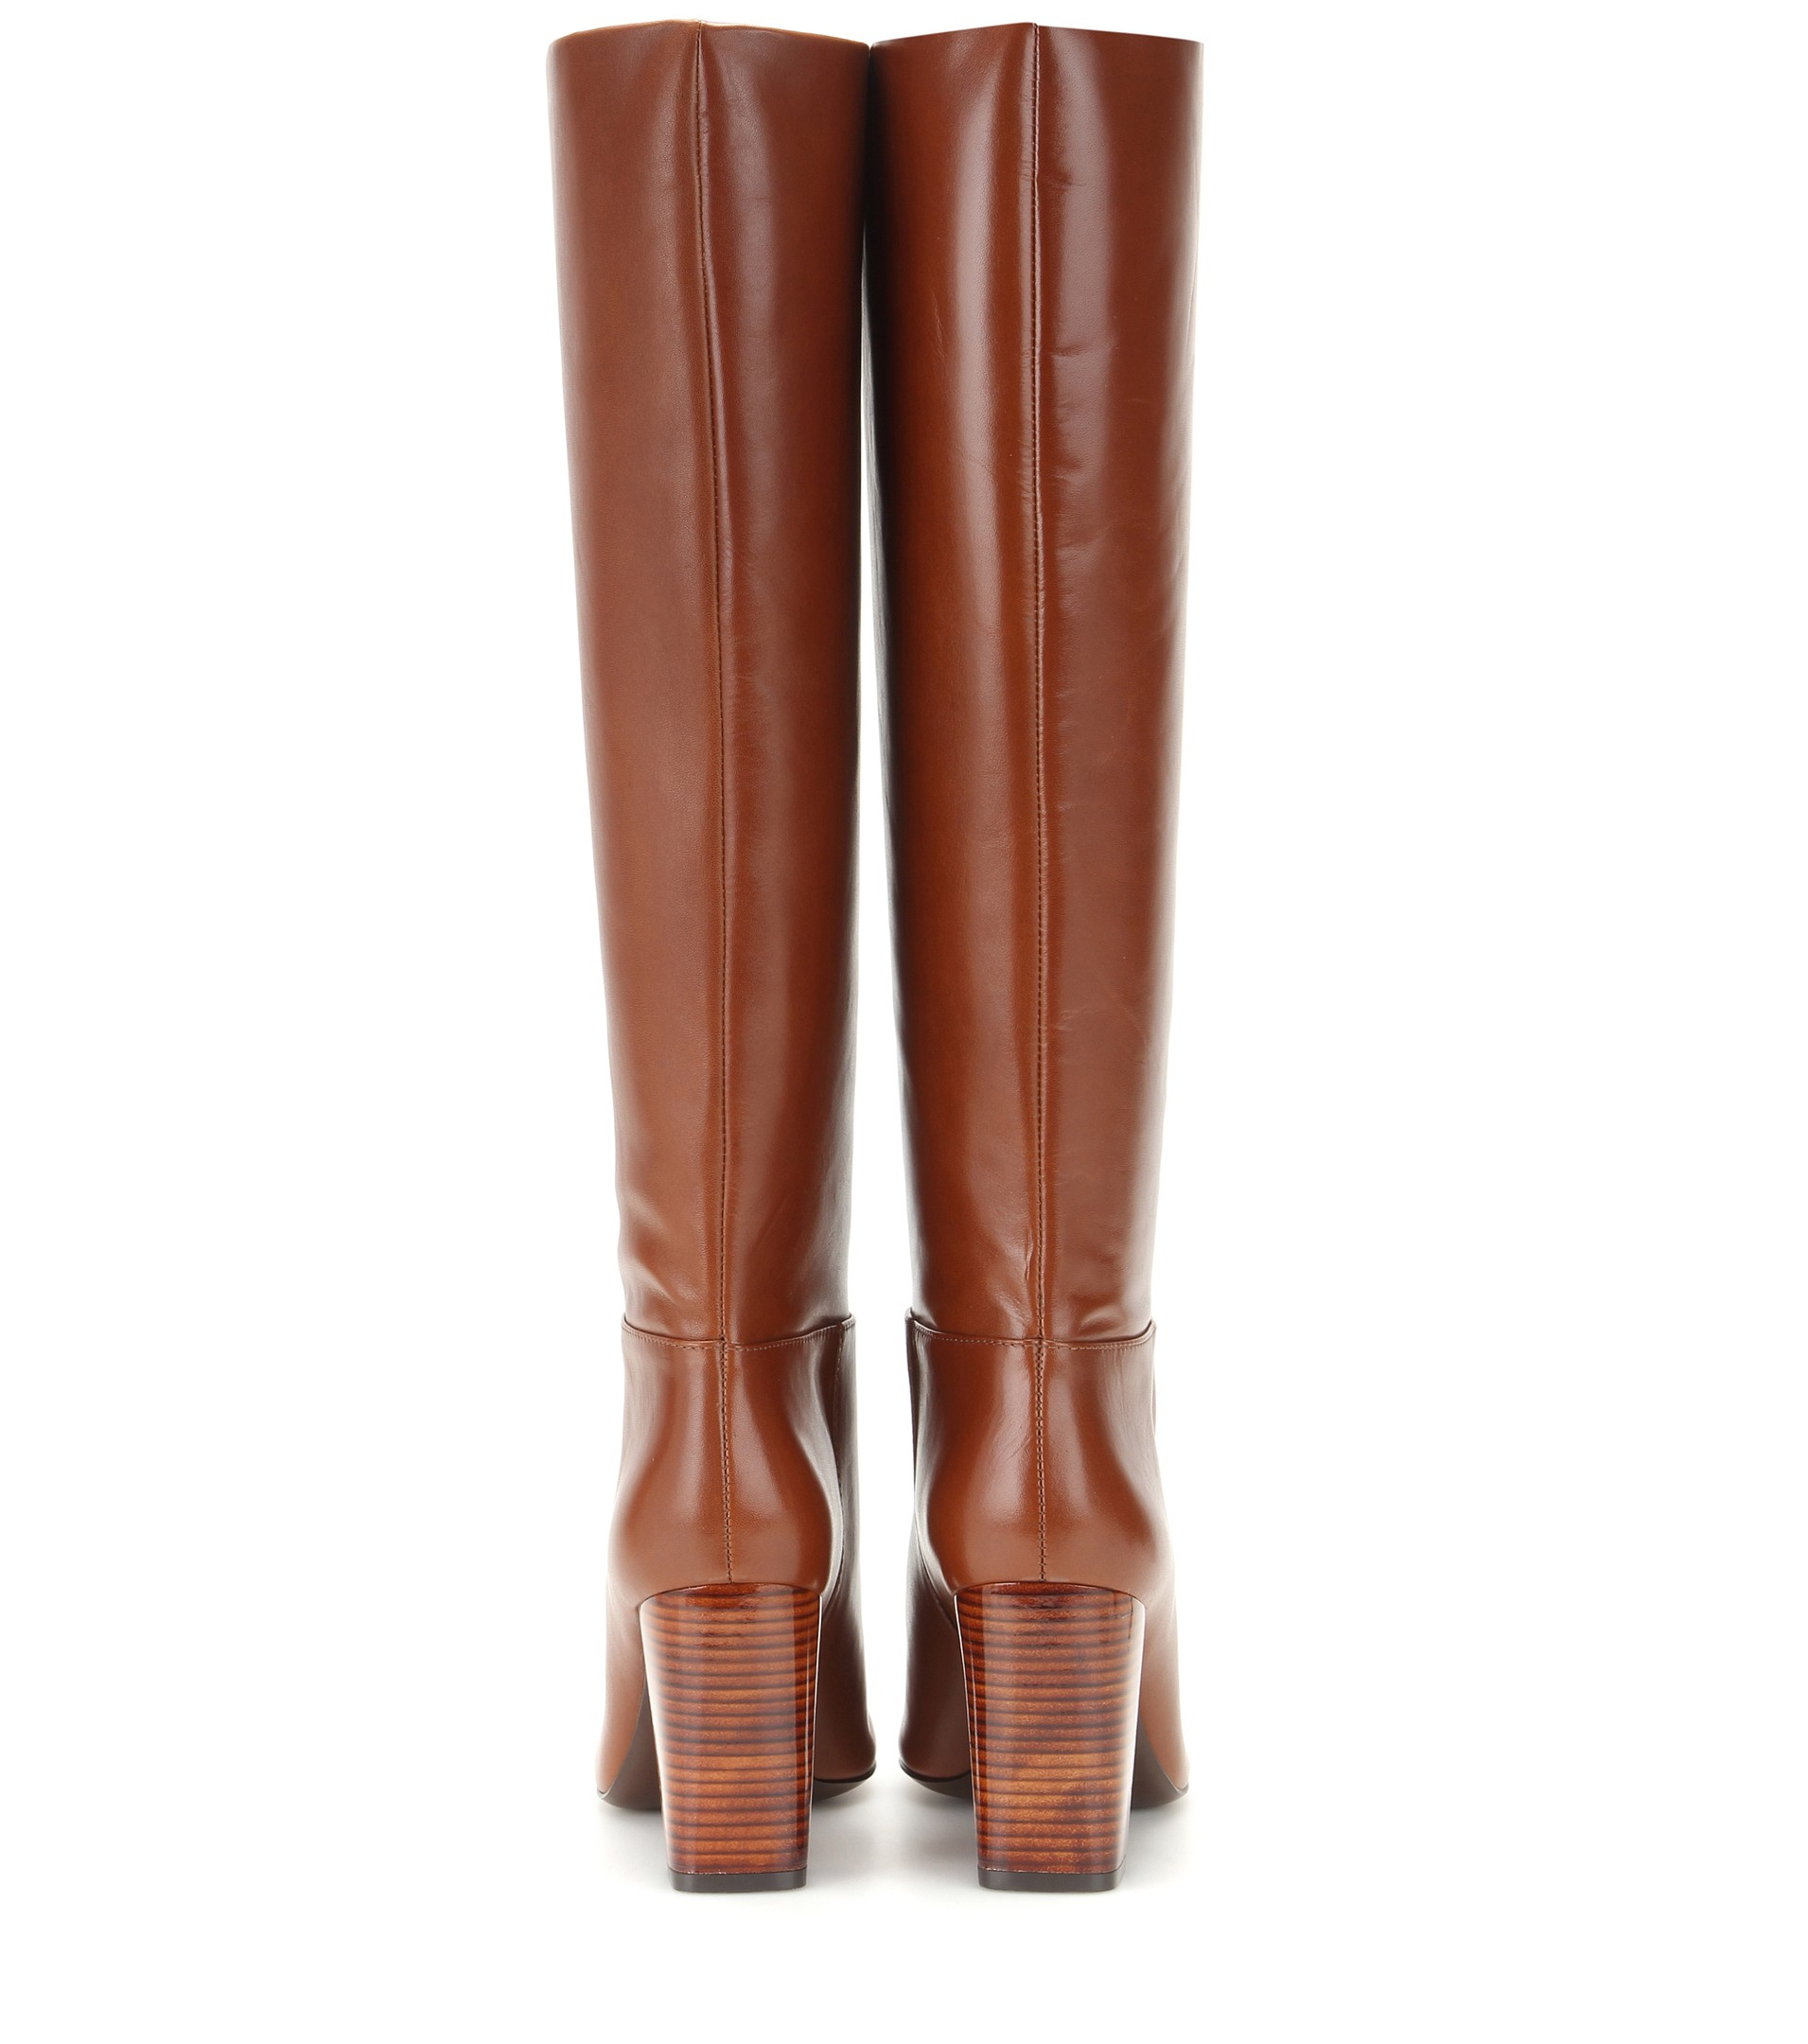 Tory Burch Knee High Leather Boots Germany, SAVE 38% 